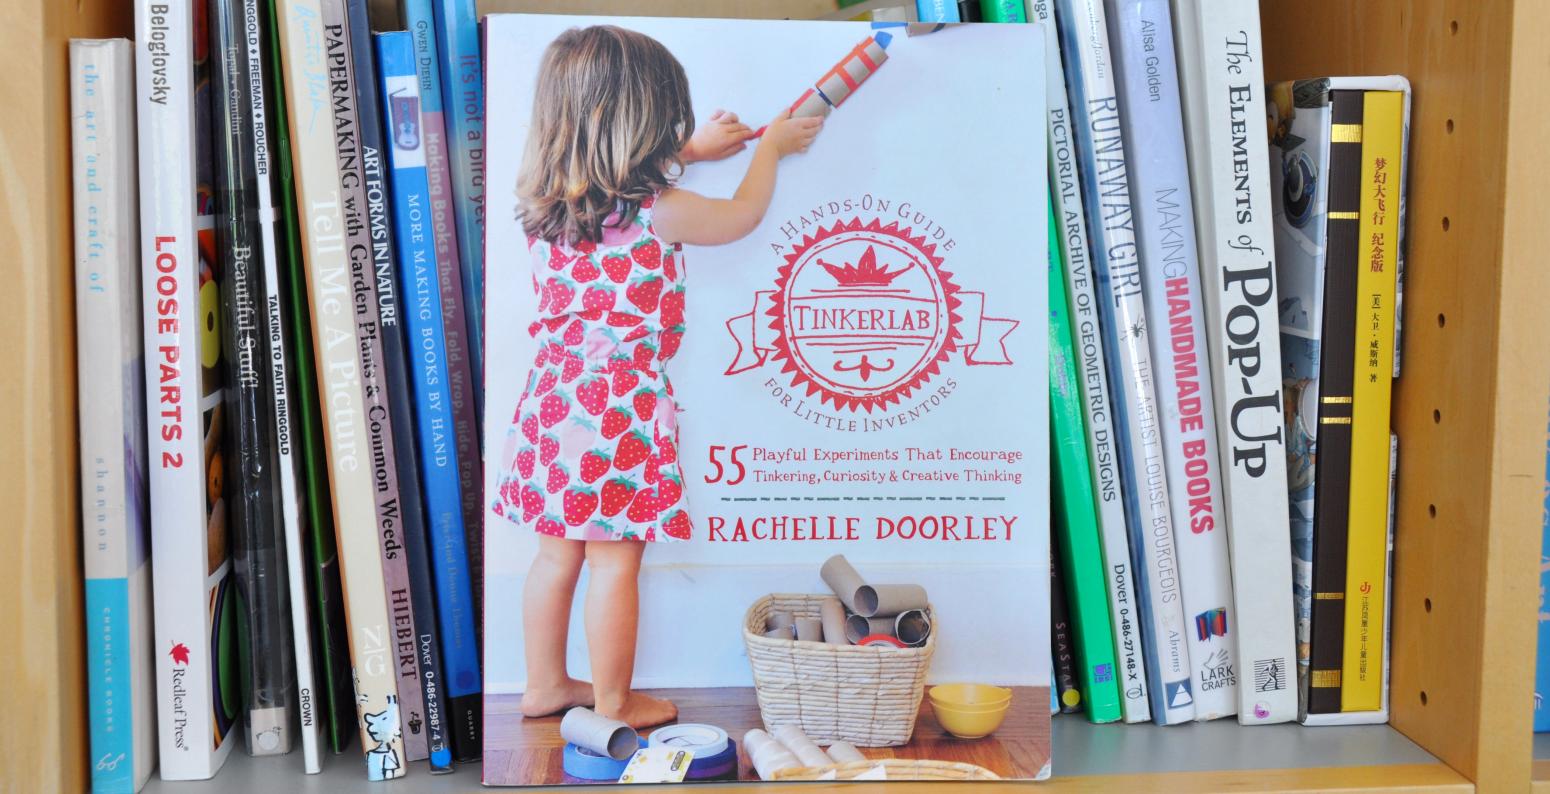 A copy of the book "Tinkerlab" sitting on a bookshelf.